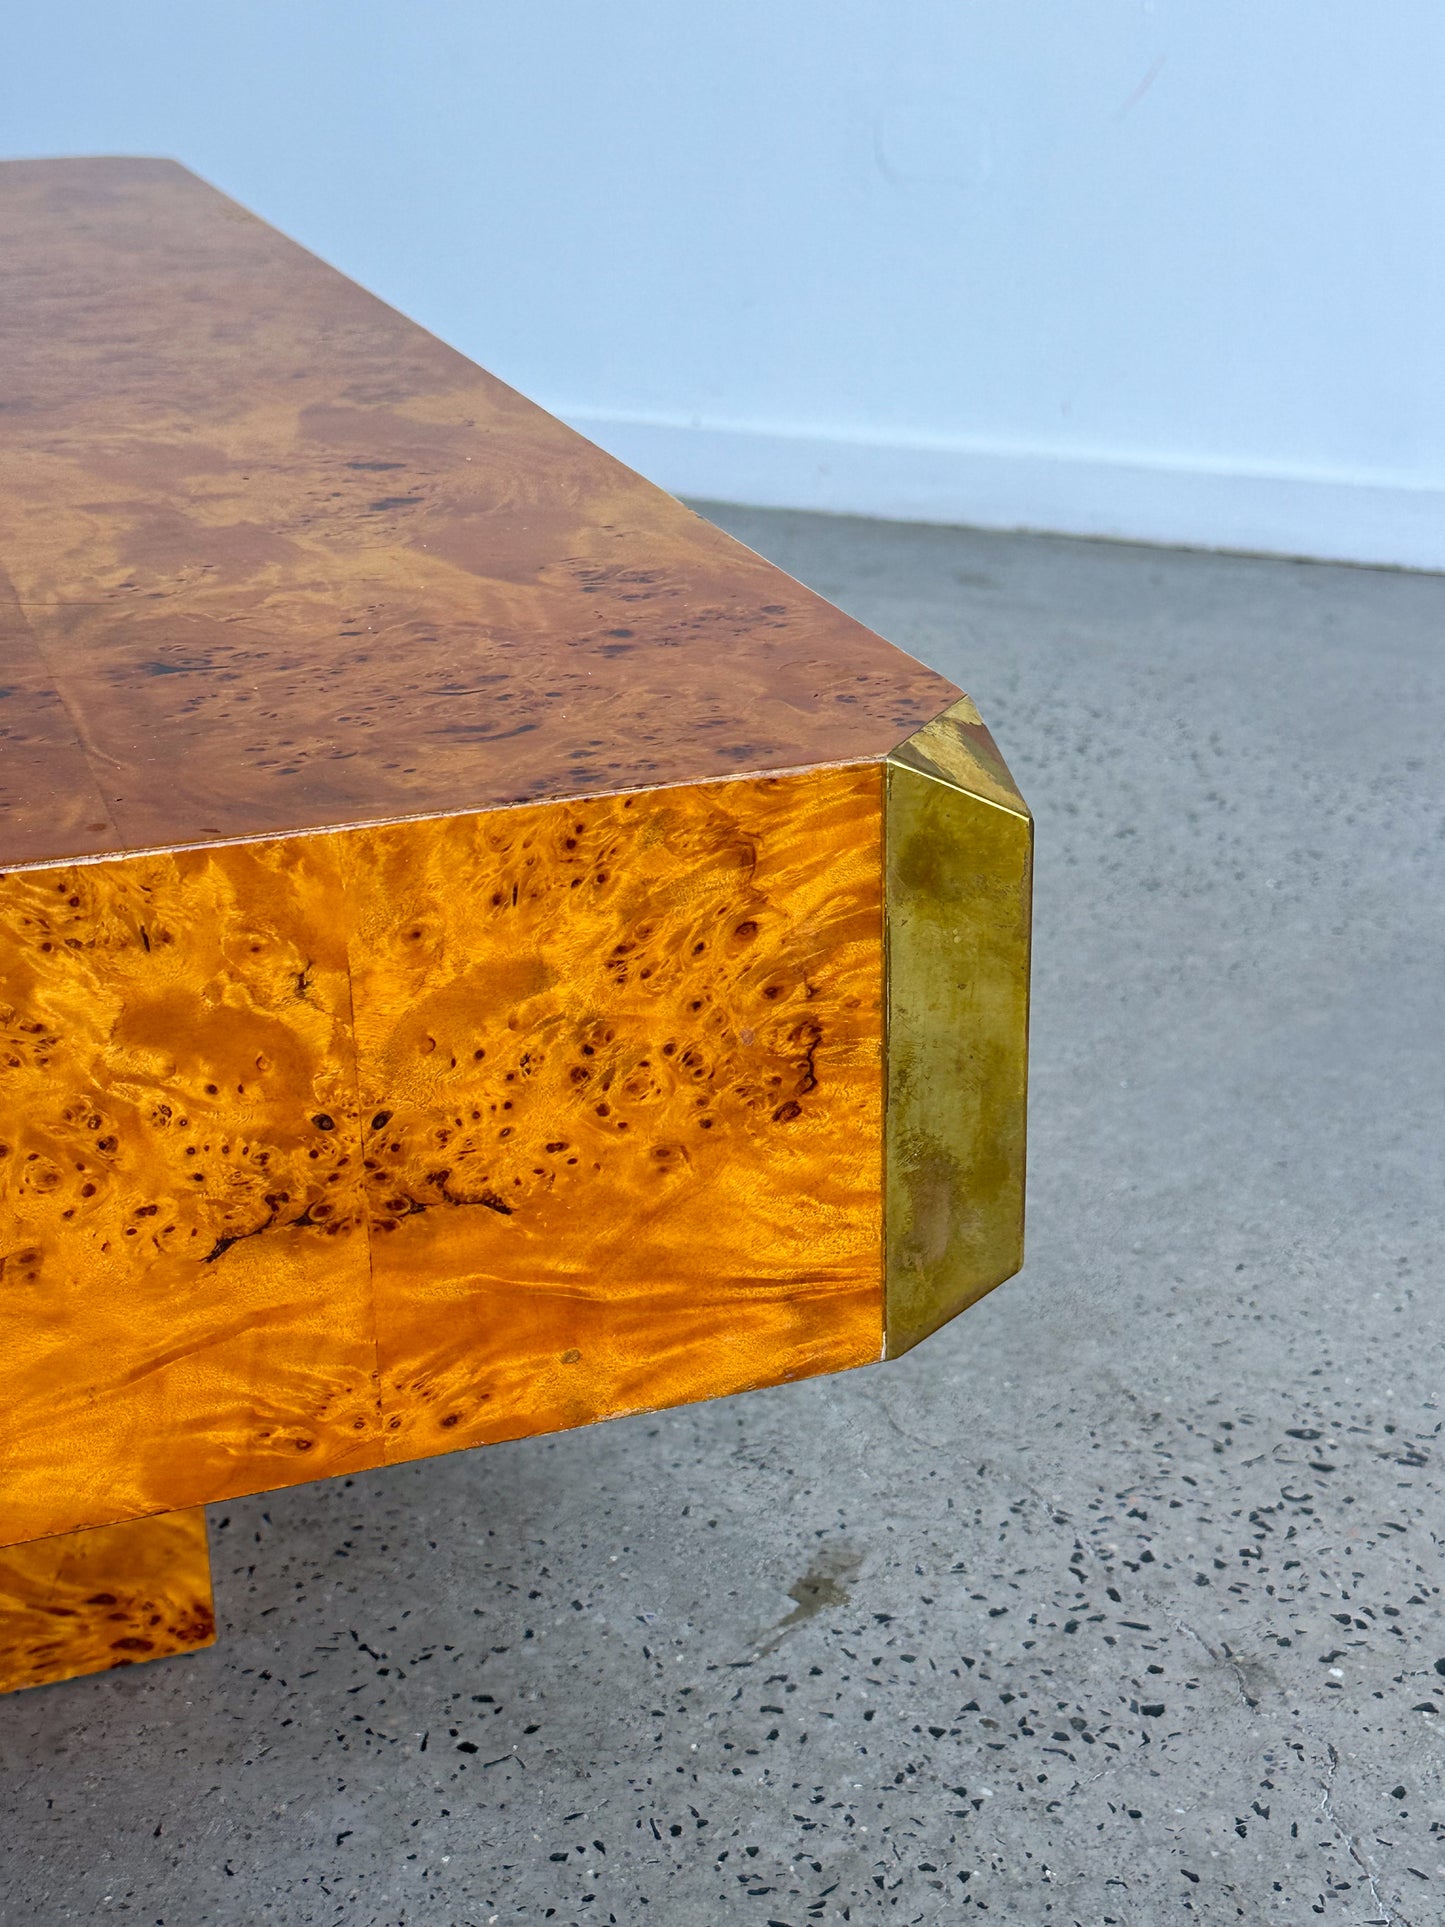 "Alveo" by Willy Rizzo for Mario Sabot Burlwood Brass Coffee Table 1970s